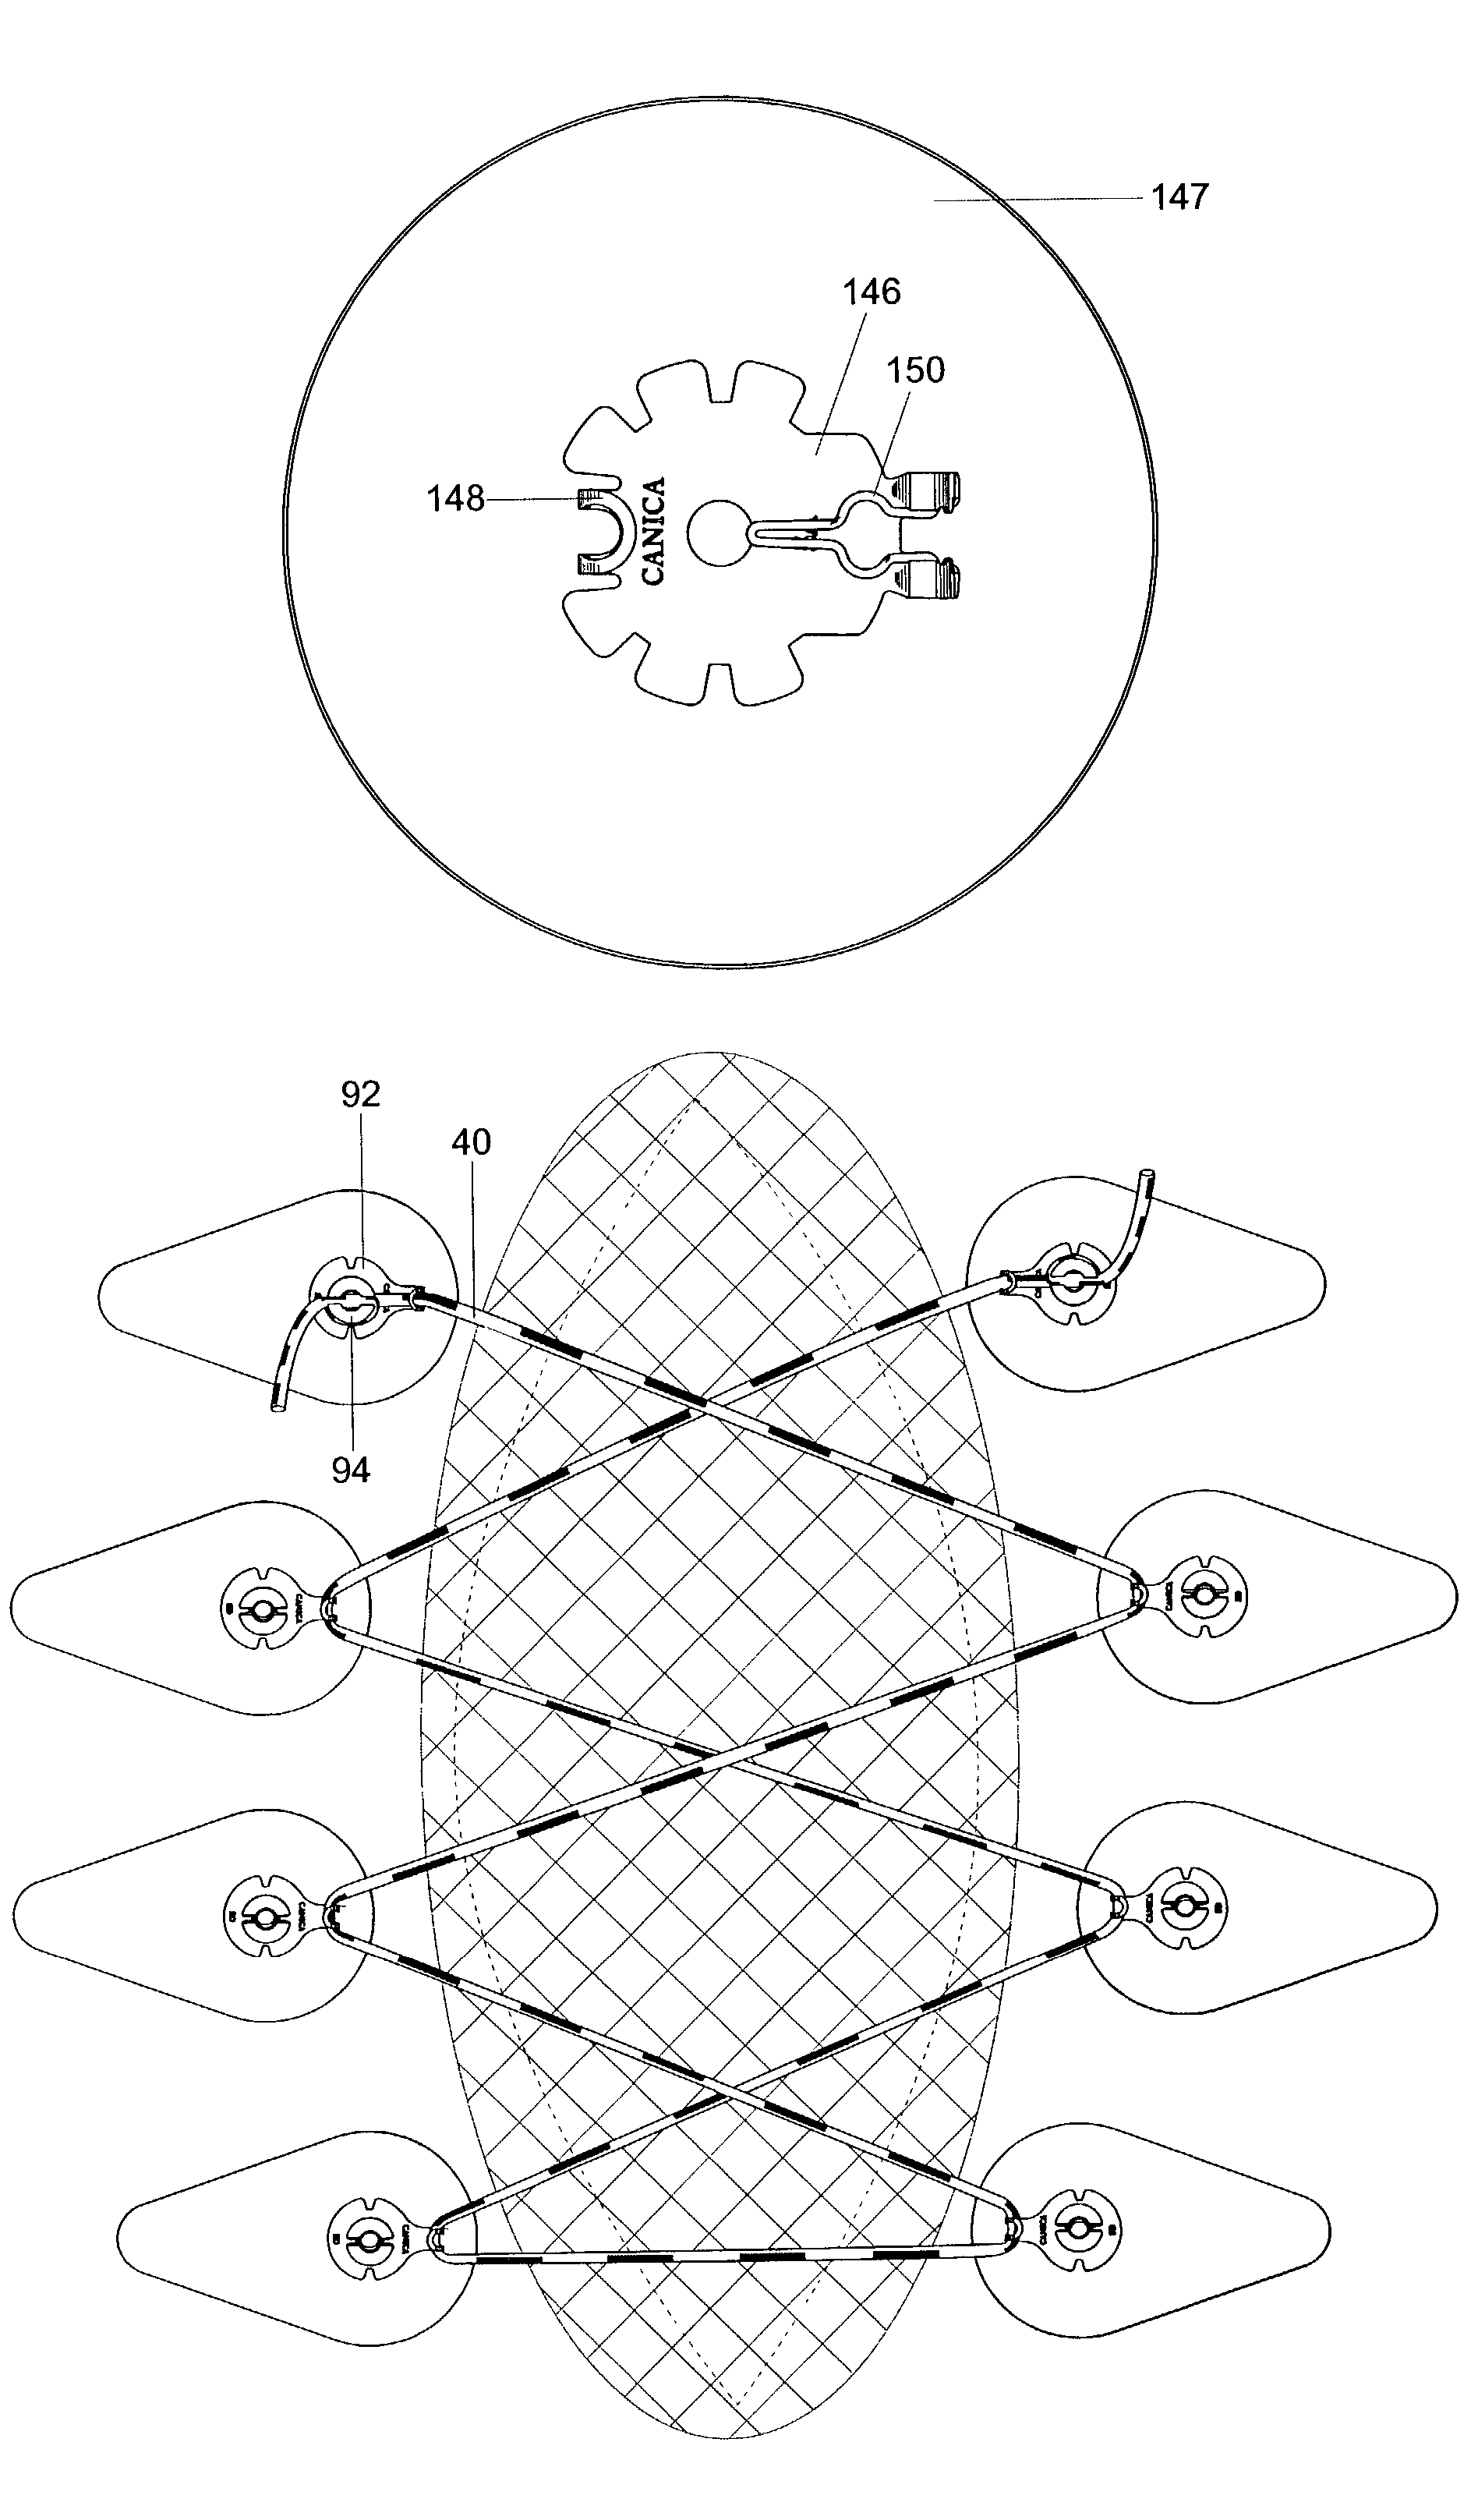 Clinical and surgical system and method for moving and stretching plastic tissue